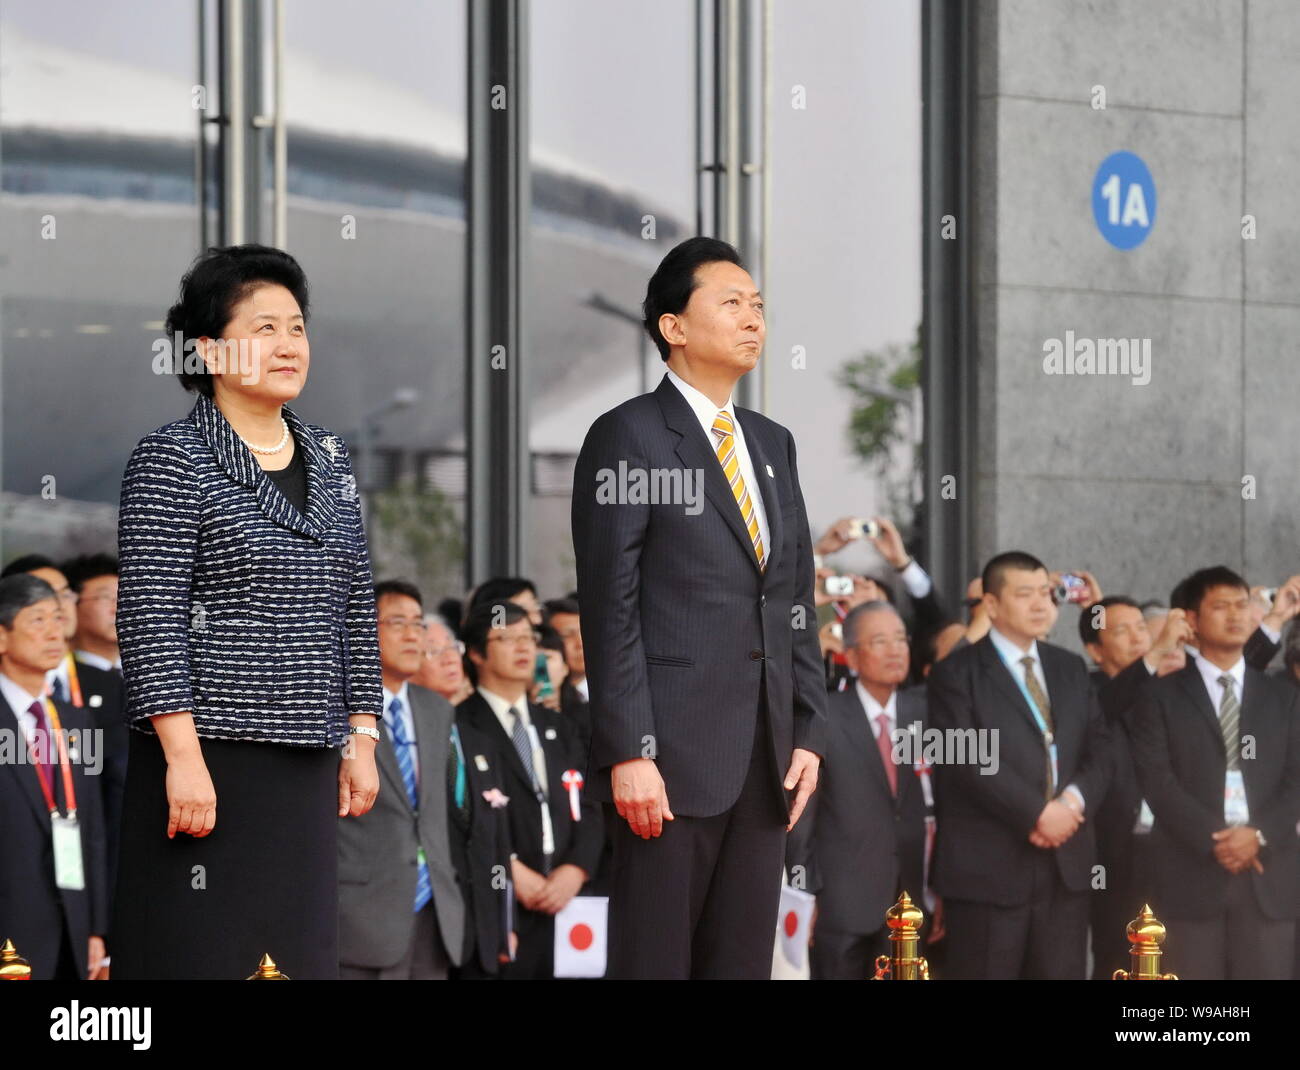 Former Japanese Prime Minister Yukio Hatoyama (R) and Chinese State Councilor Liu Yandong are seen during an event celebrating the Japan Pavilion Day Stock Photo